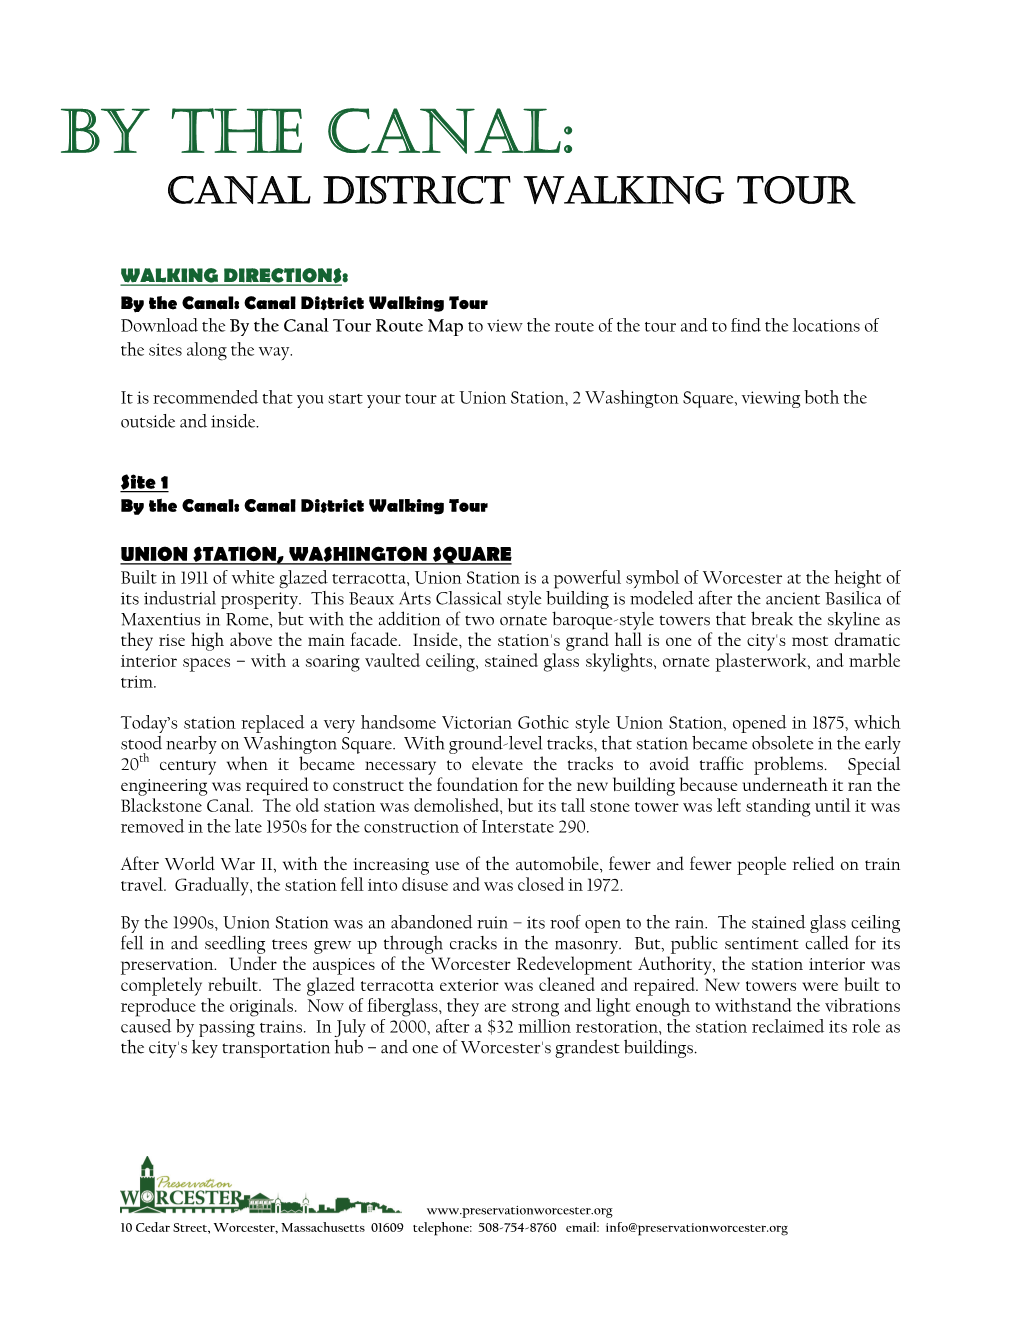 By the Canal Tour Route Map to View the Route of the Tour and to Find the Locations of the Sites Along the Way